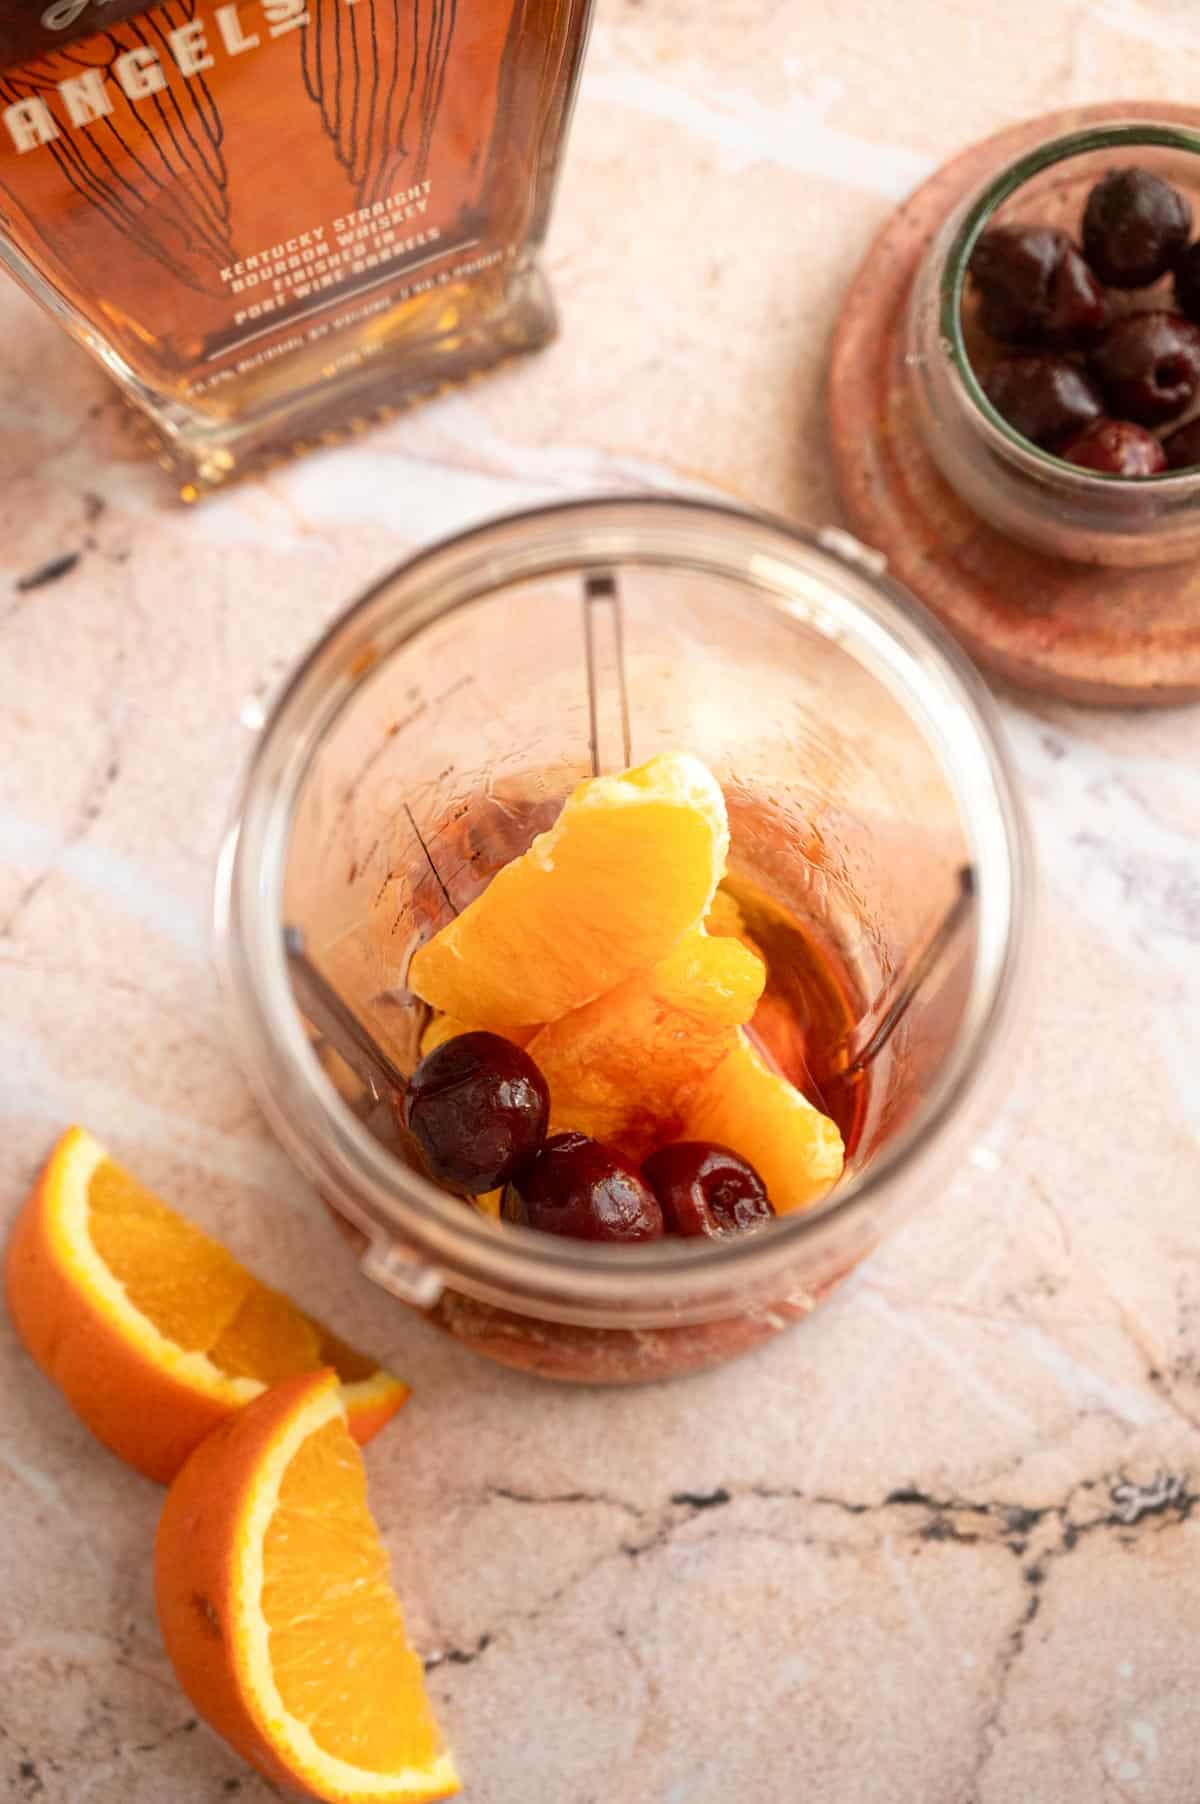 The oranges, cherries, bourbon, syrup, and bitters in a blender.